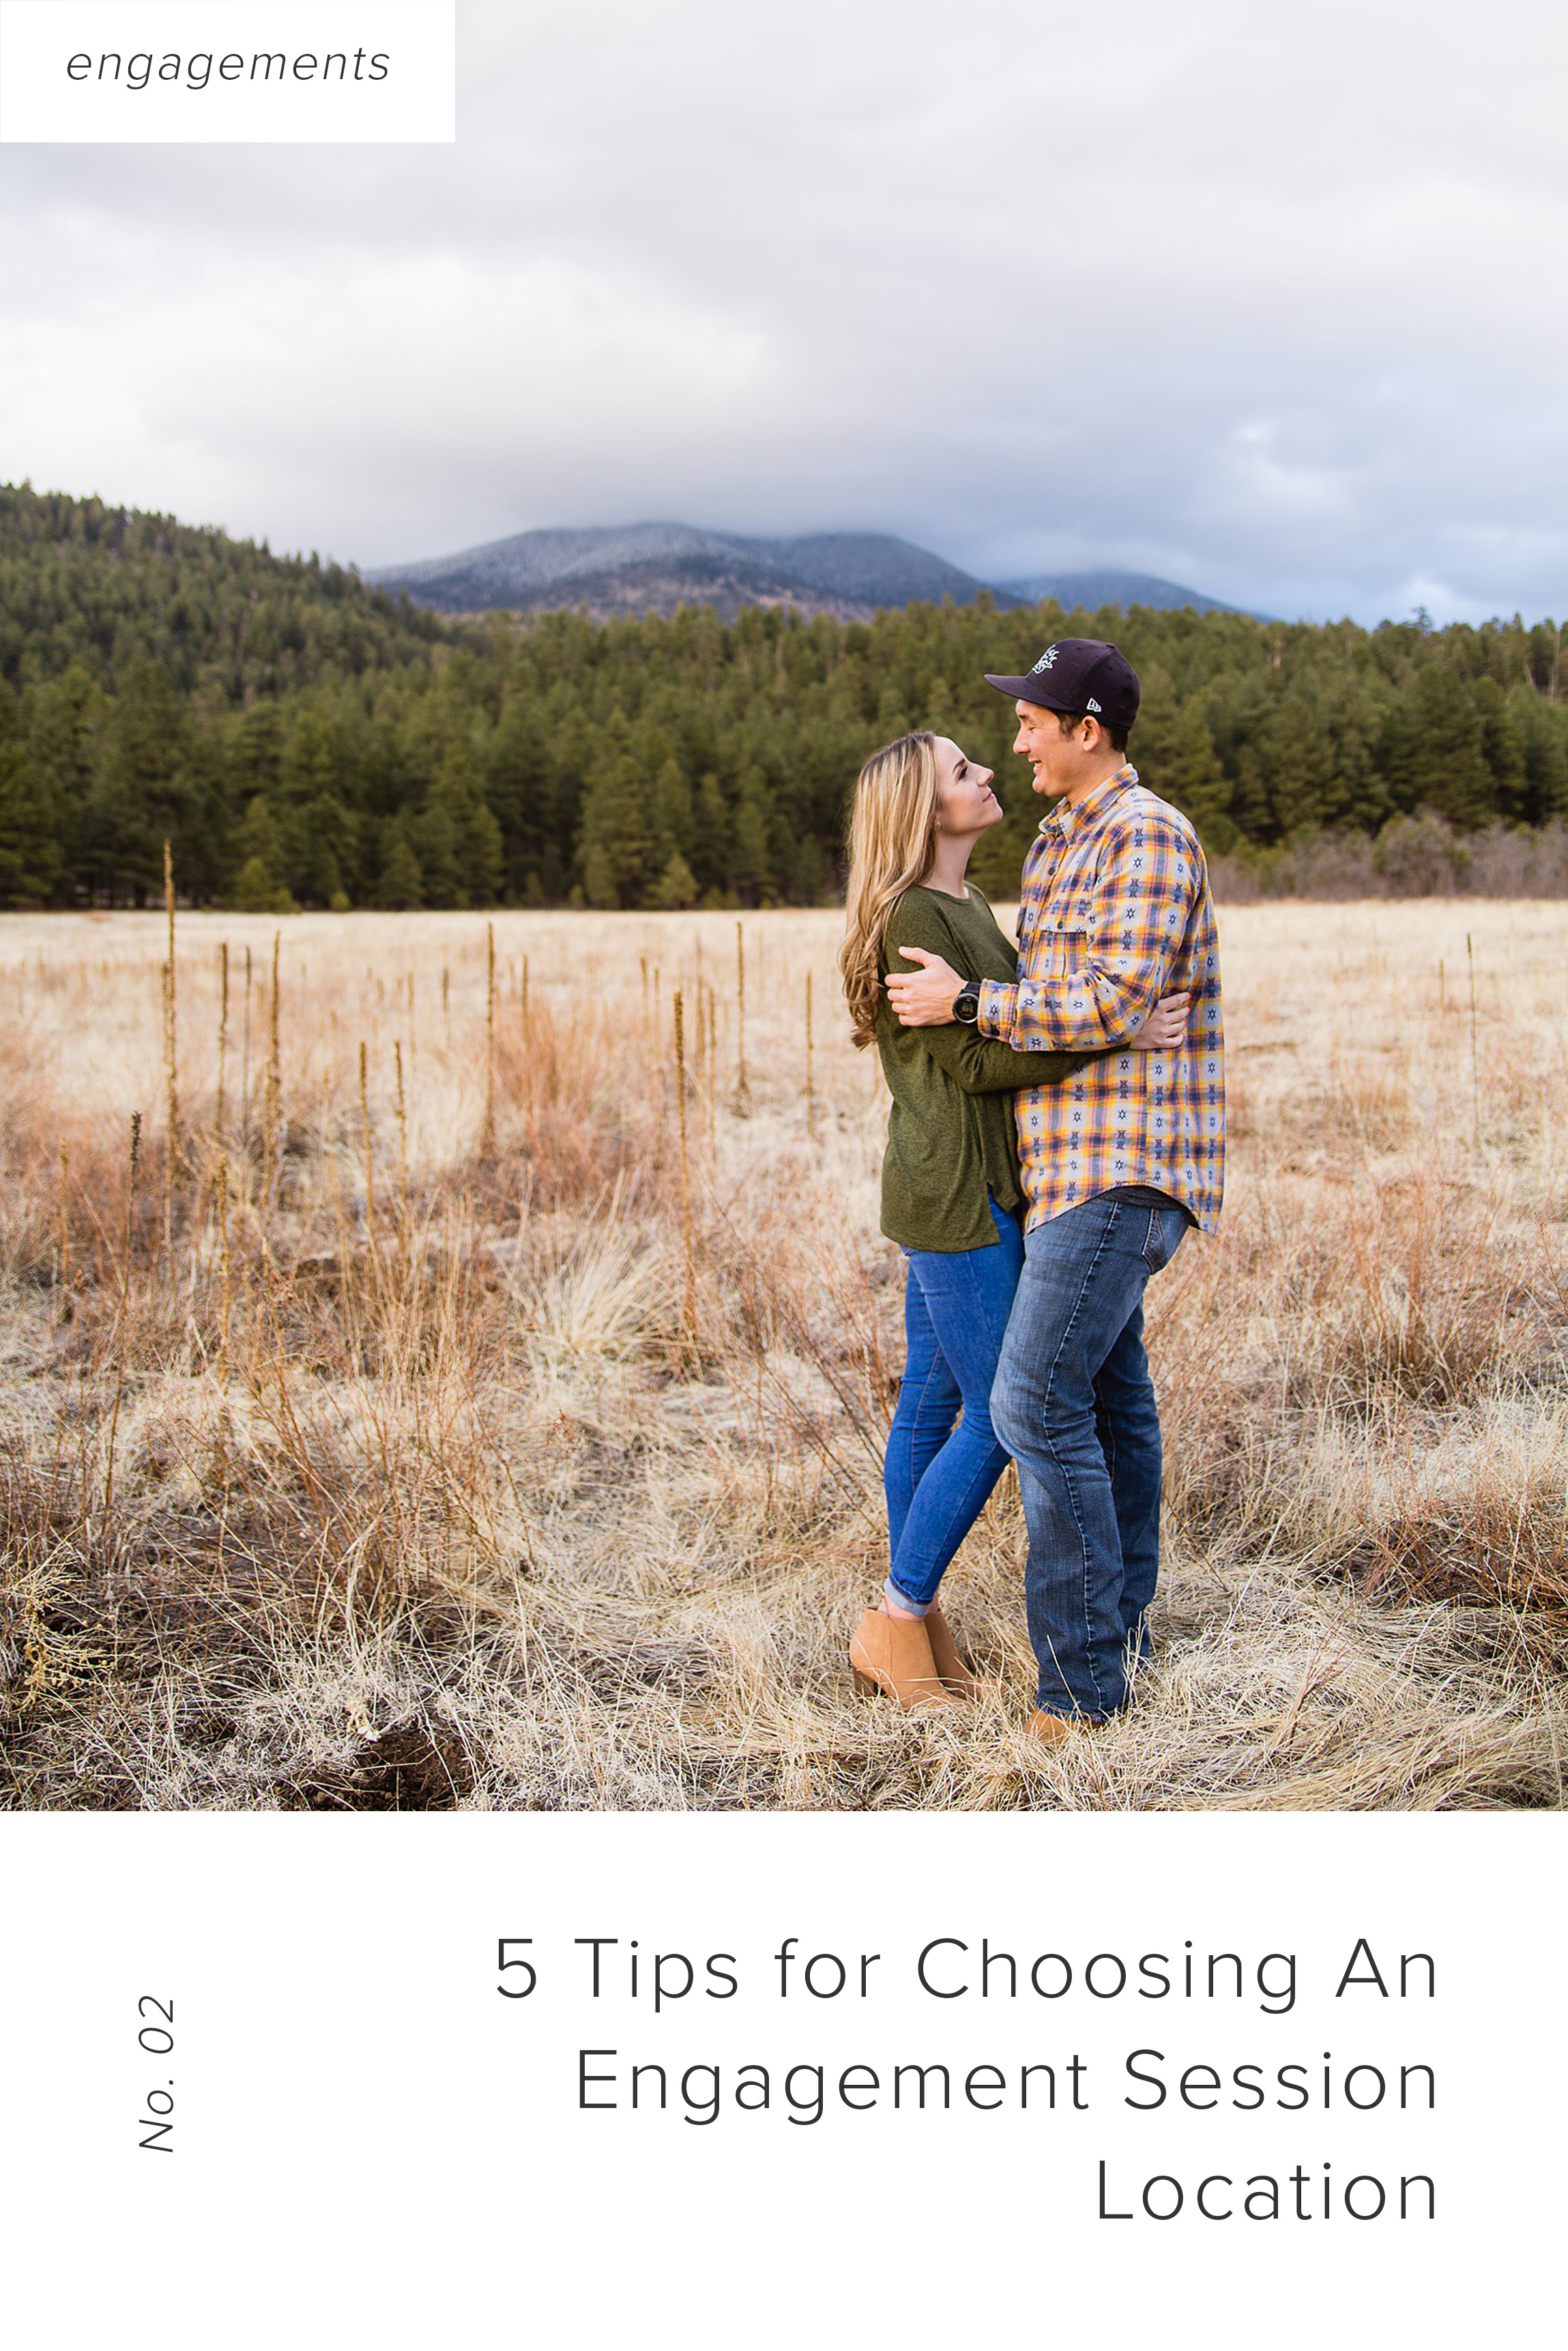 5 tips for choosing your engagement session location by Phoenix wedding photographer PMA Photography.